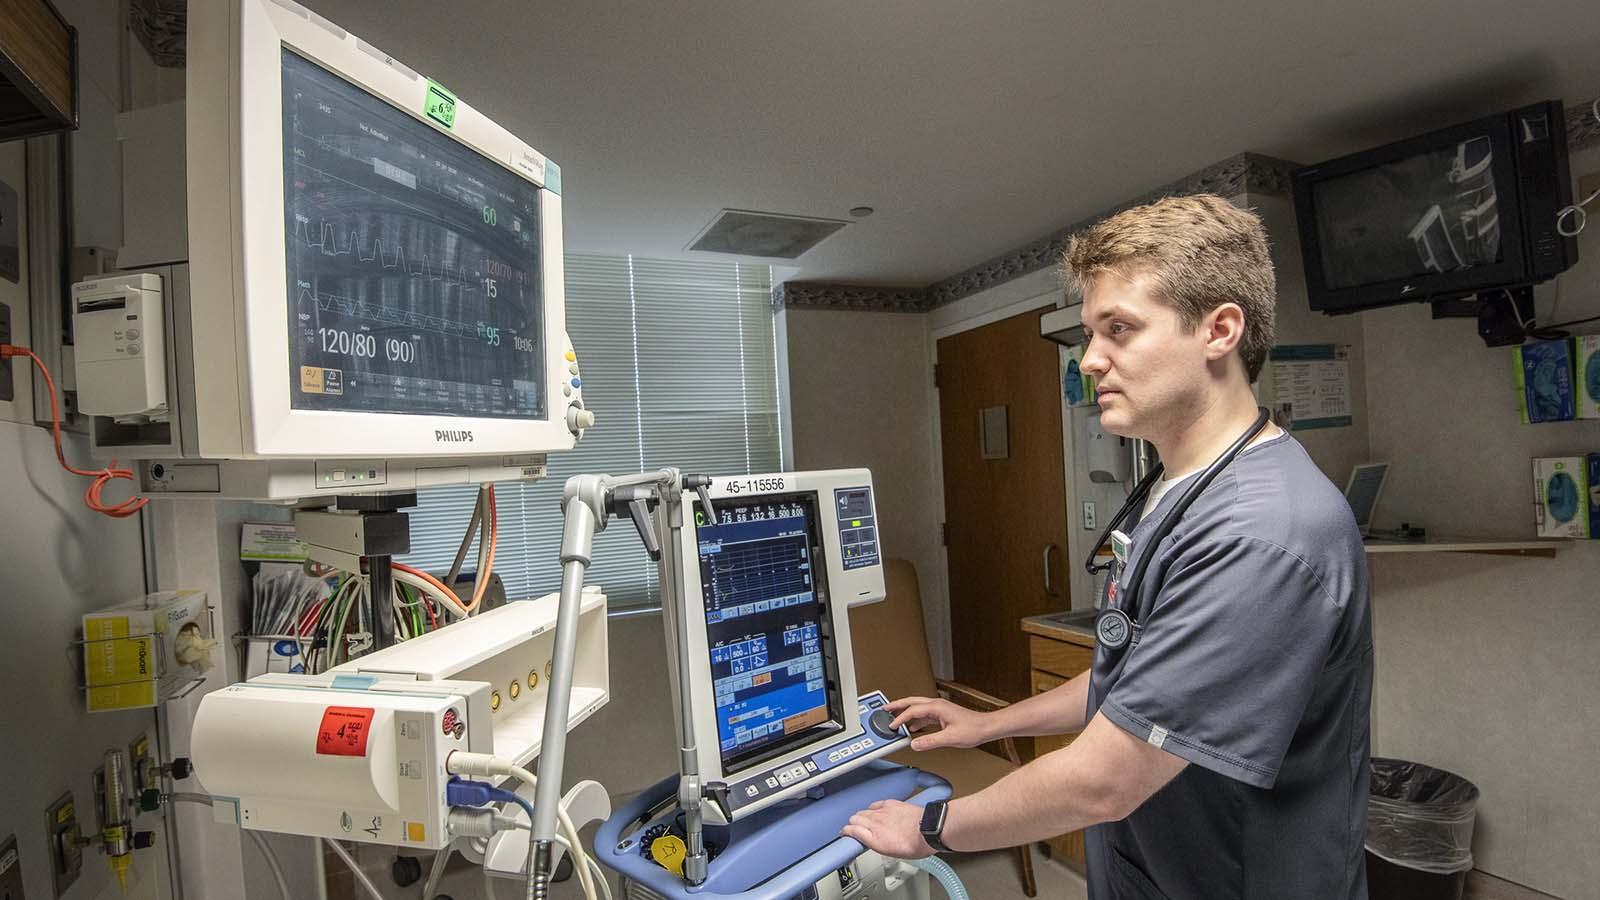 Male respiratory therapy student monitoring vitals of patient